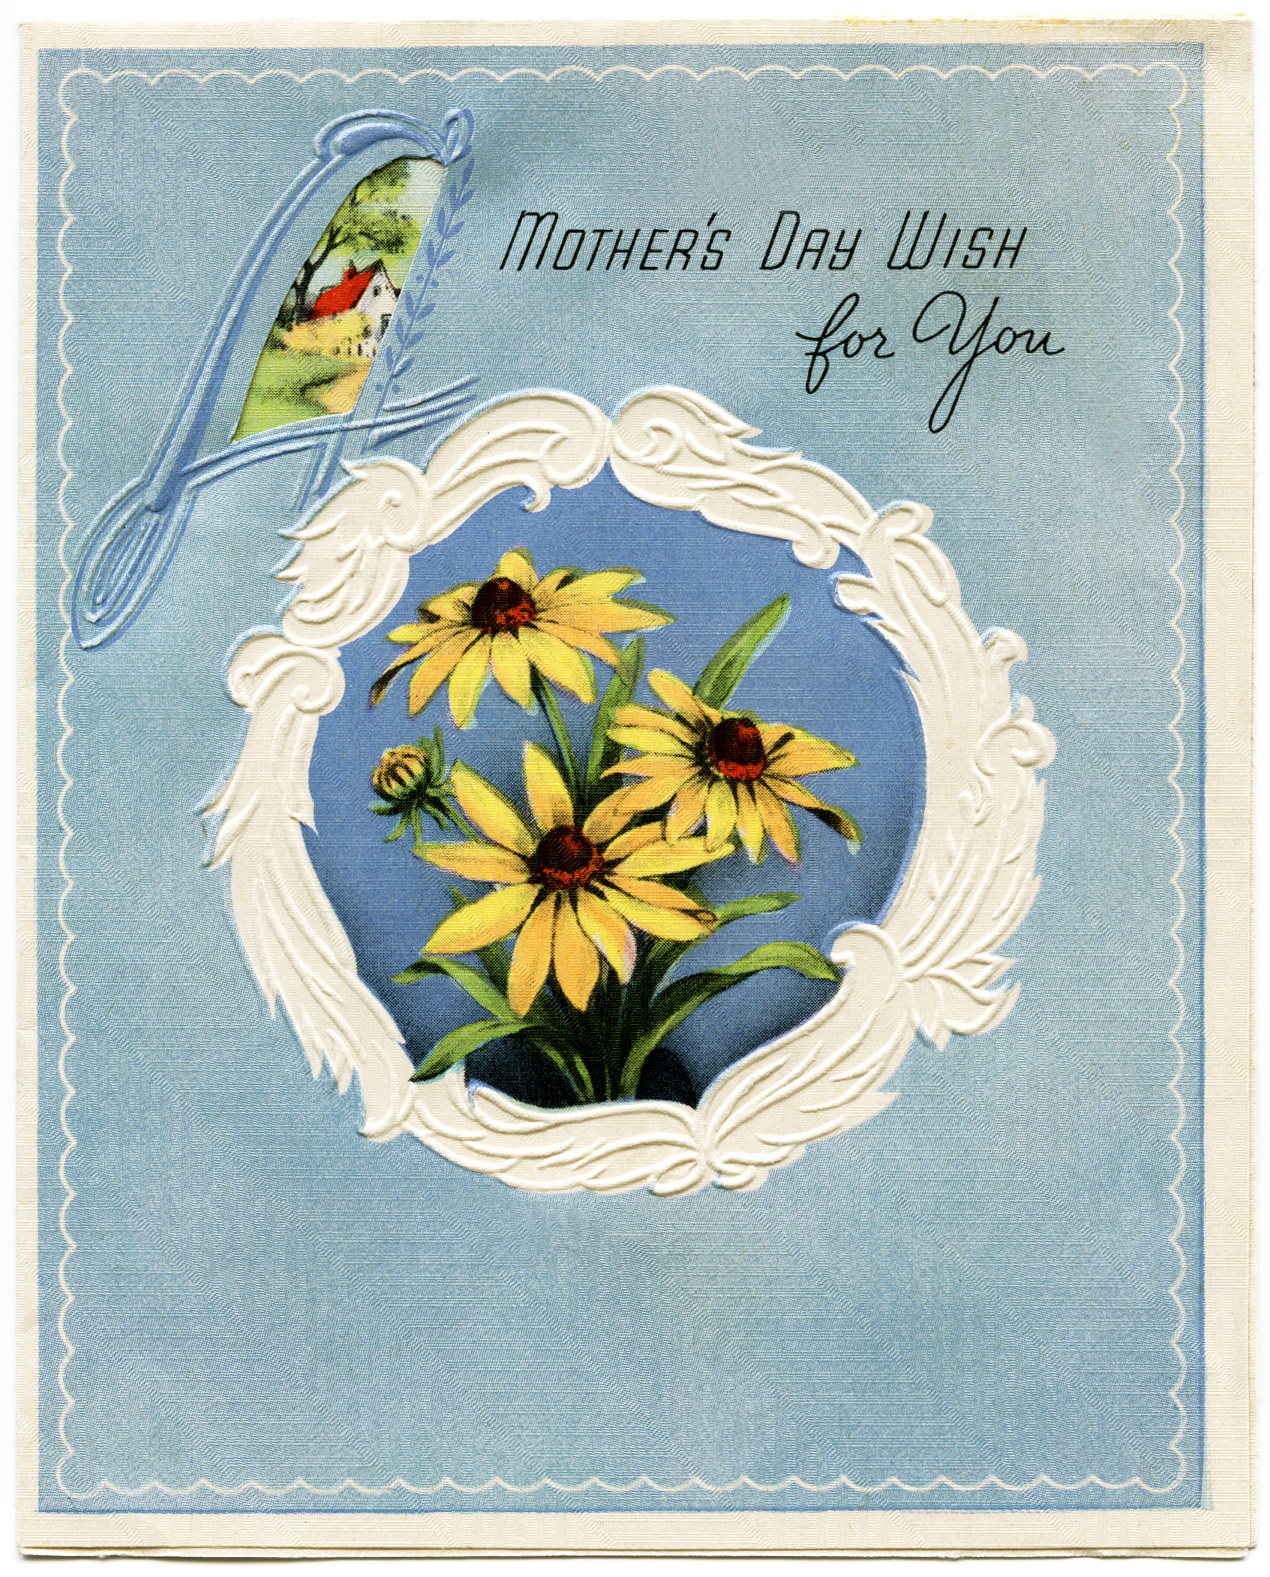 Here is another free vintage Mother’s Day digital card for you. 